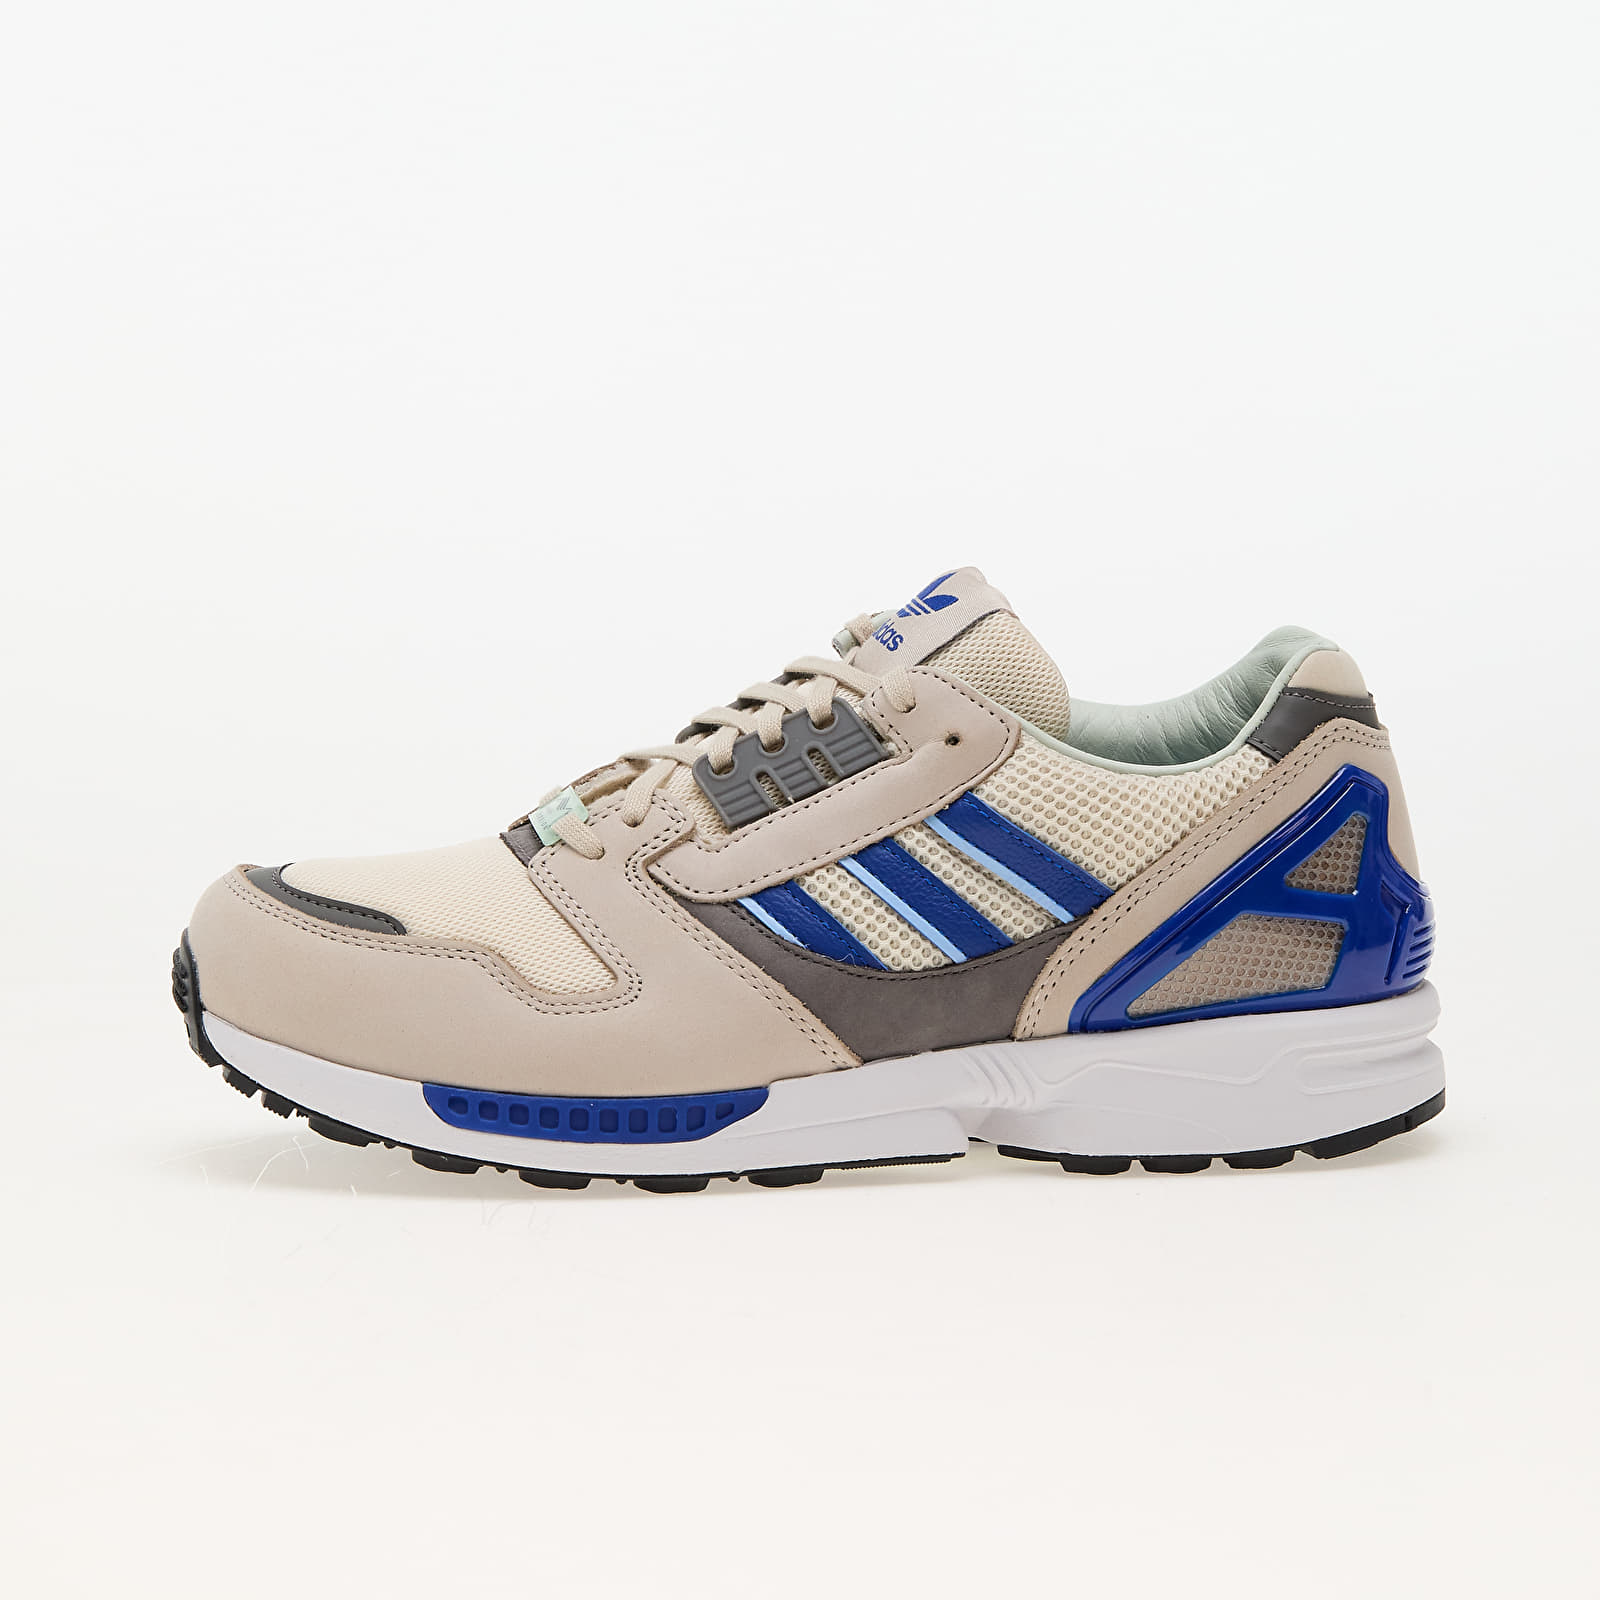 Men's sneakers and shoes adidas ZX8000 Wonder White/ Royal Blue/ Linen Green